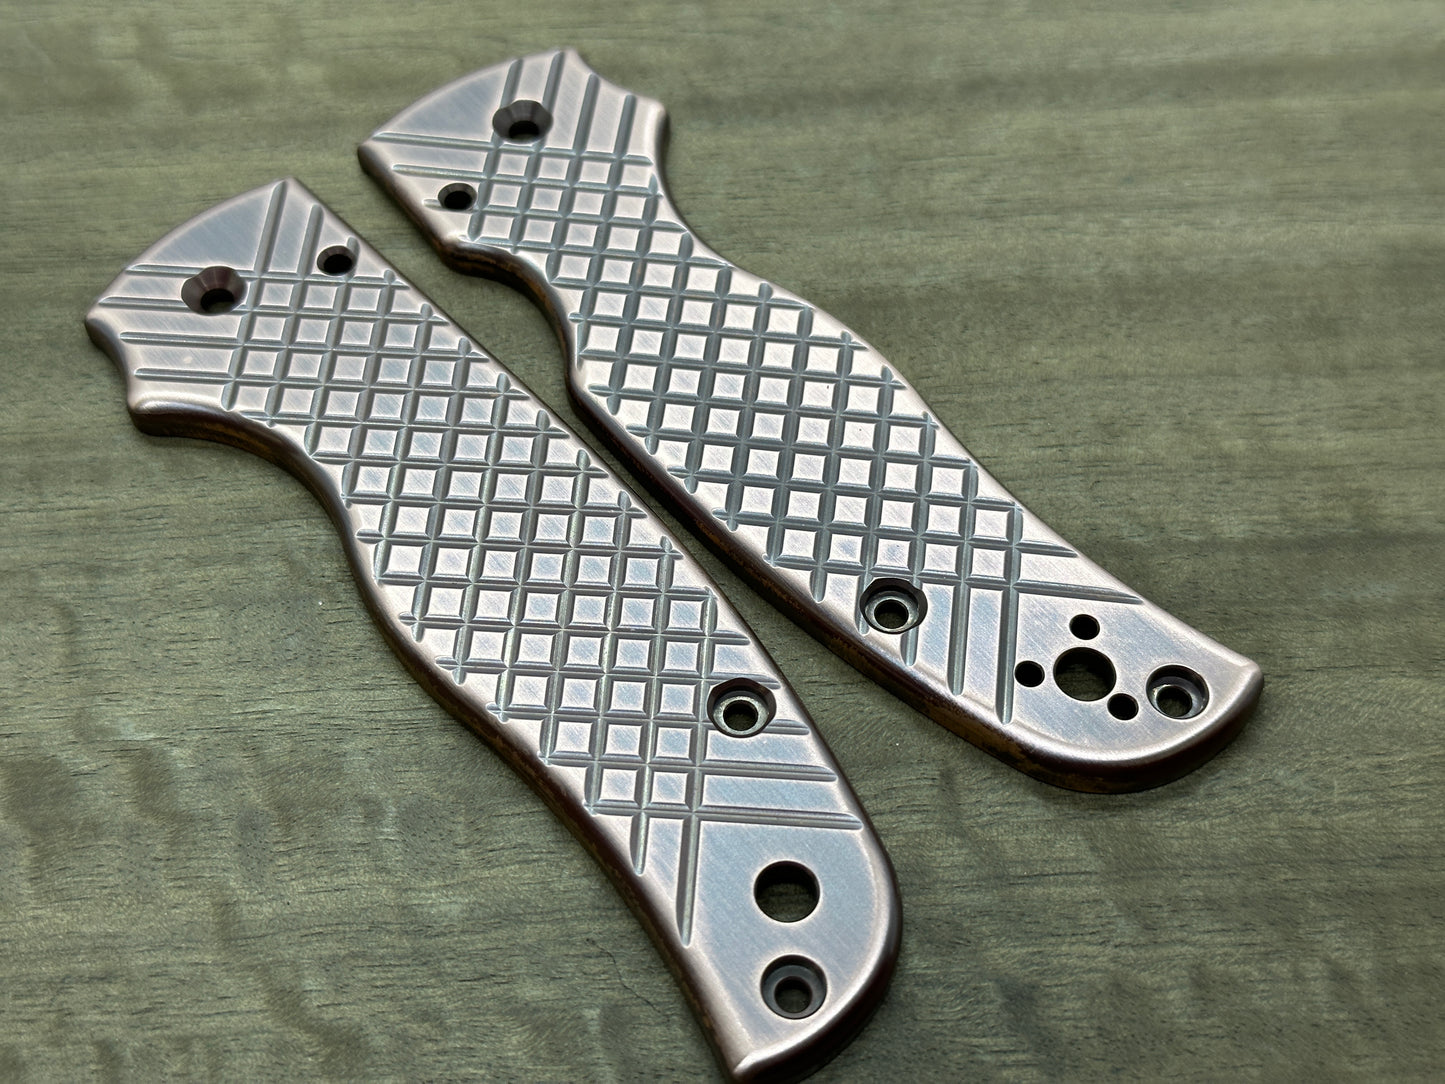 FRAG milled 2-Tone Dark & Brushed Copper Scales for SHAMAN Spyderco